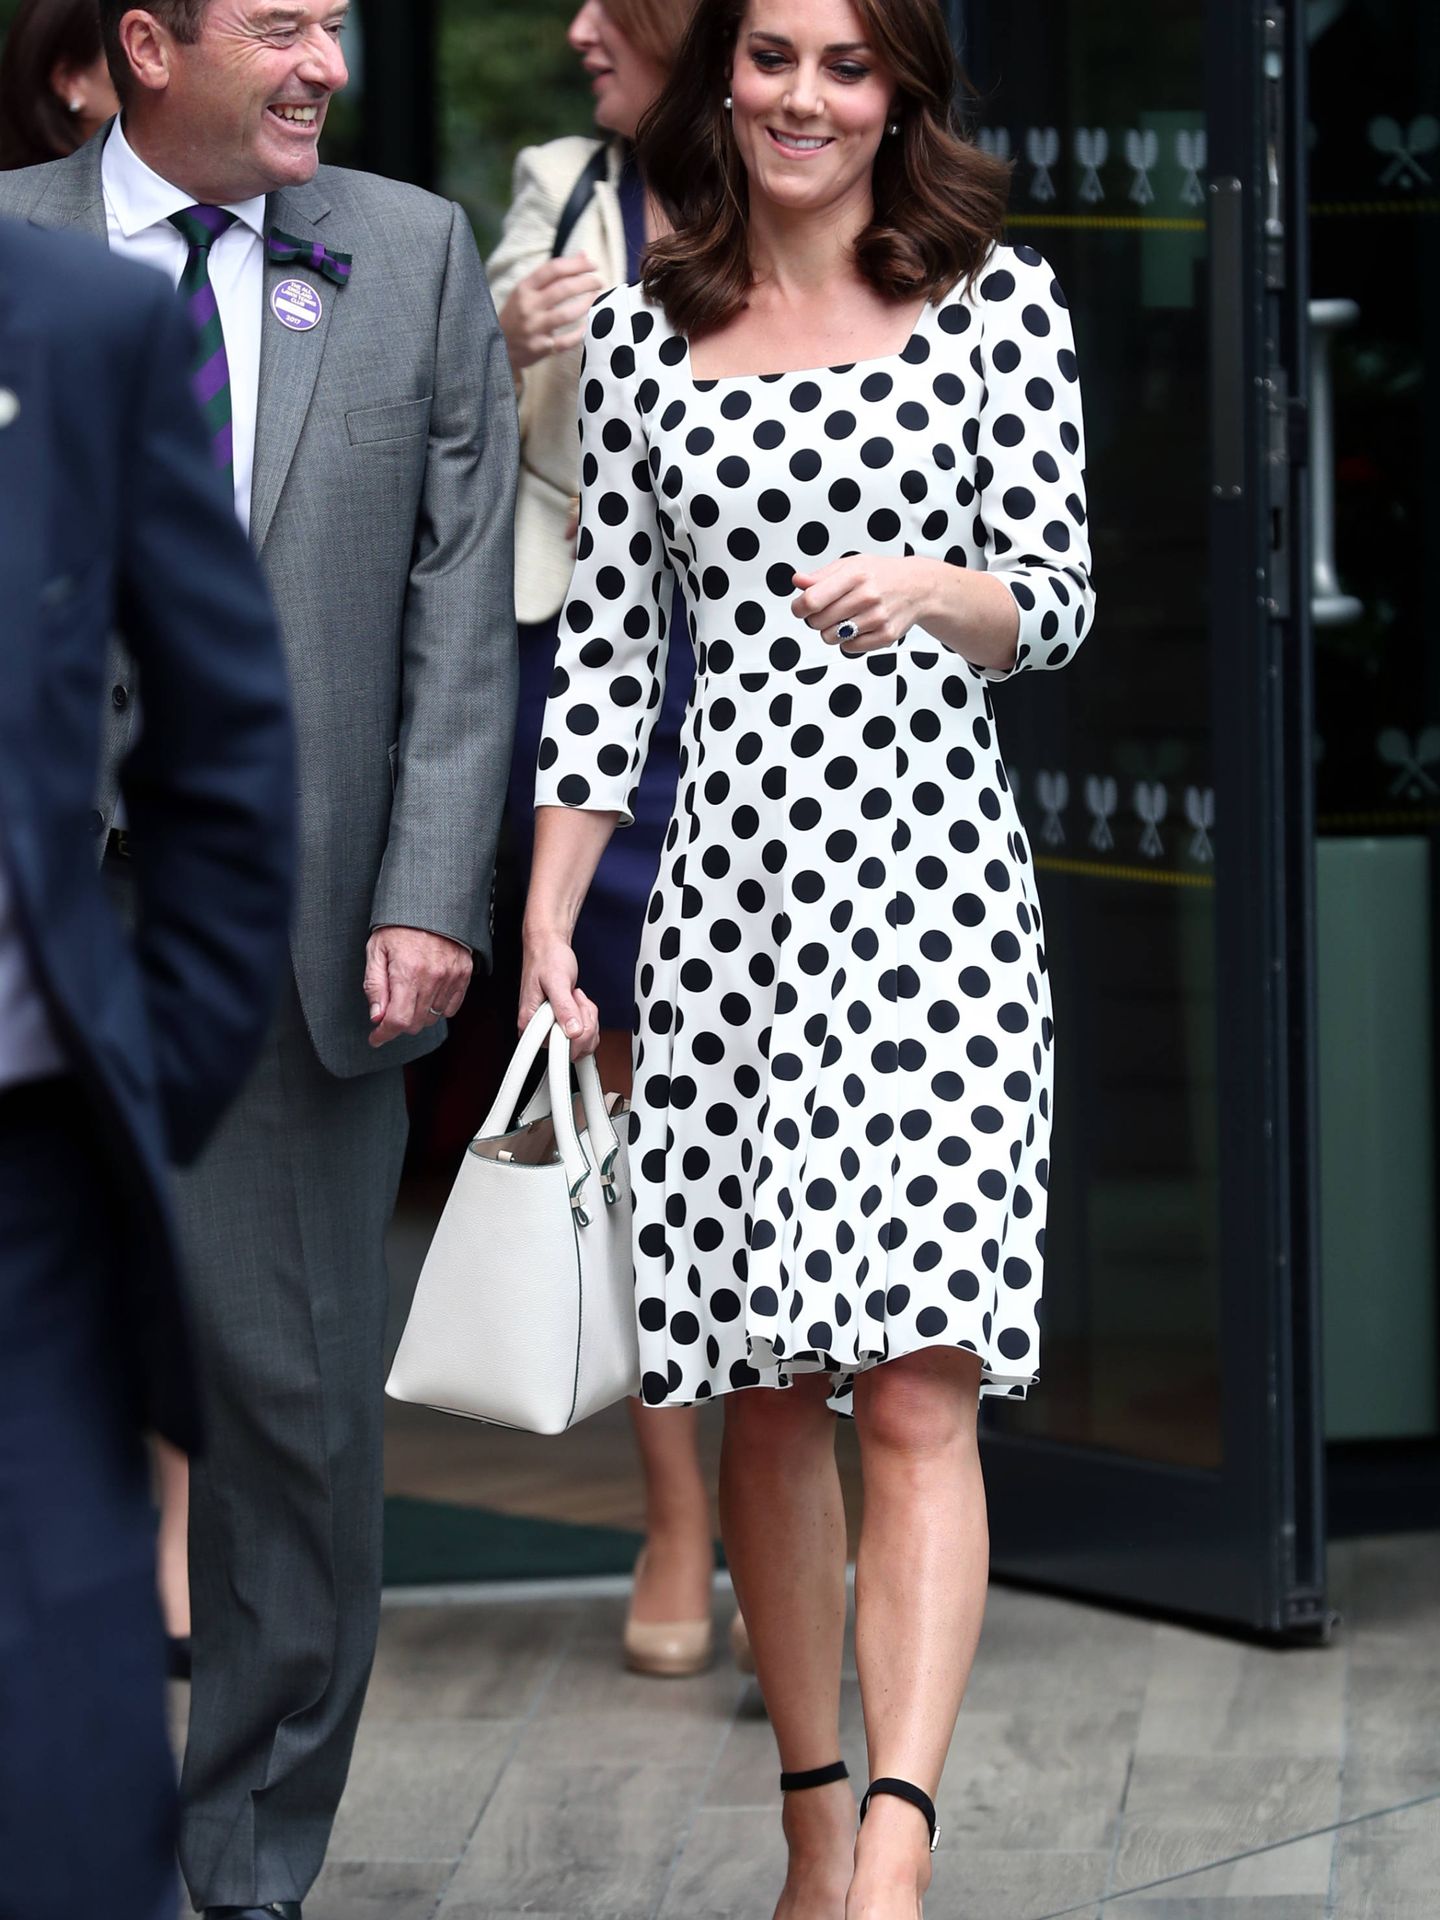 Kate Middleton, Duchess of Cambridge with Sir Philip Brook attending Wimbledon Championships in Wimbledon.